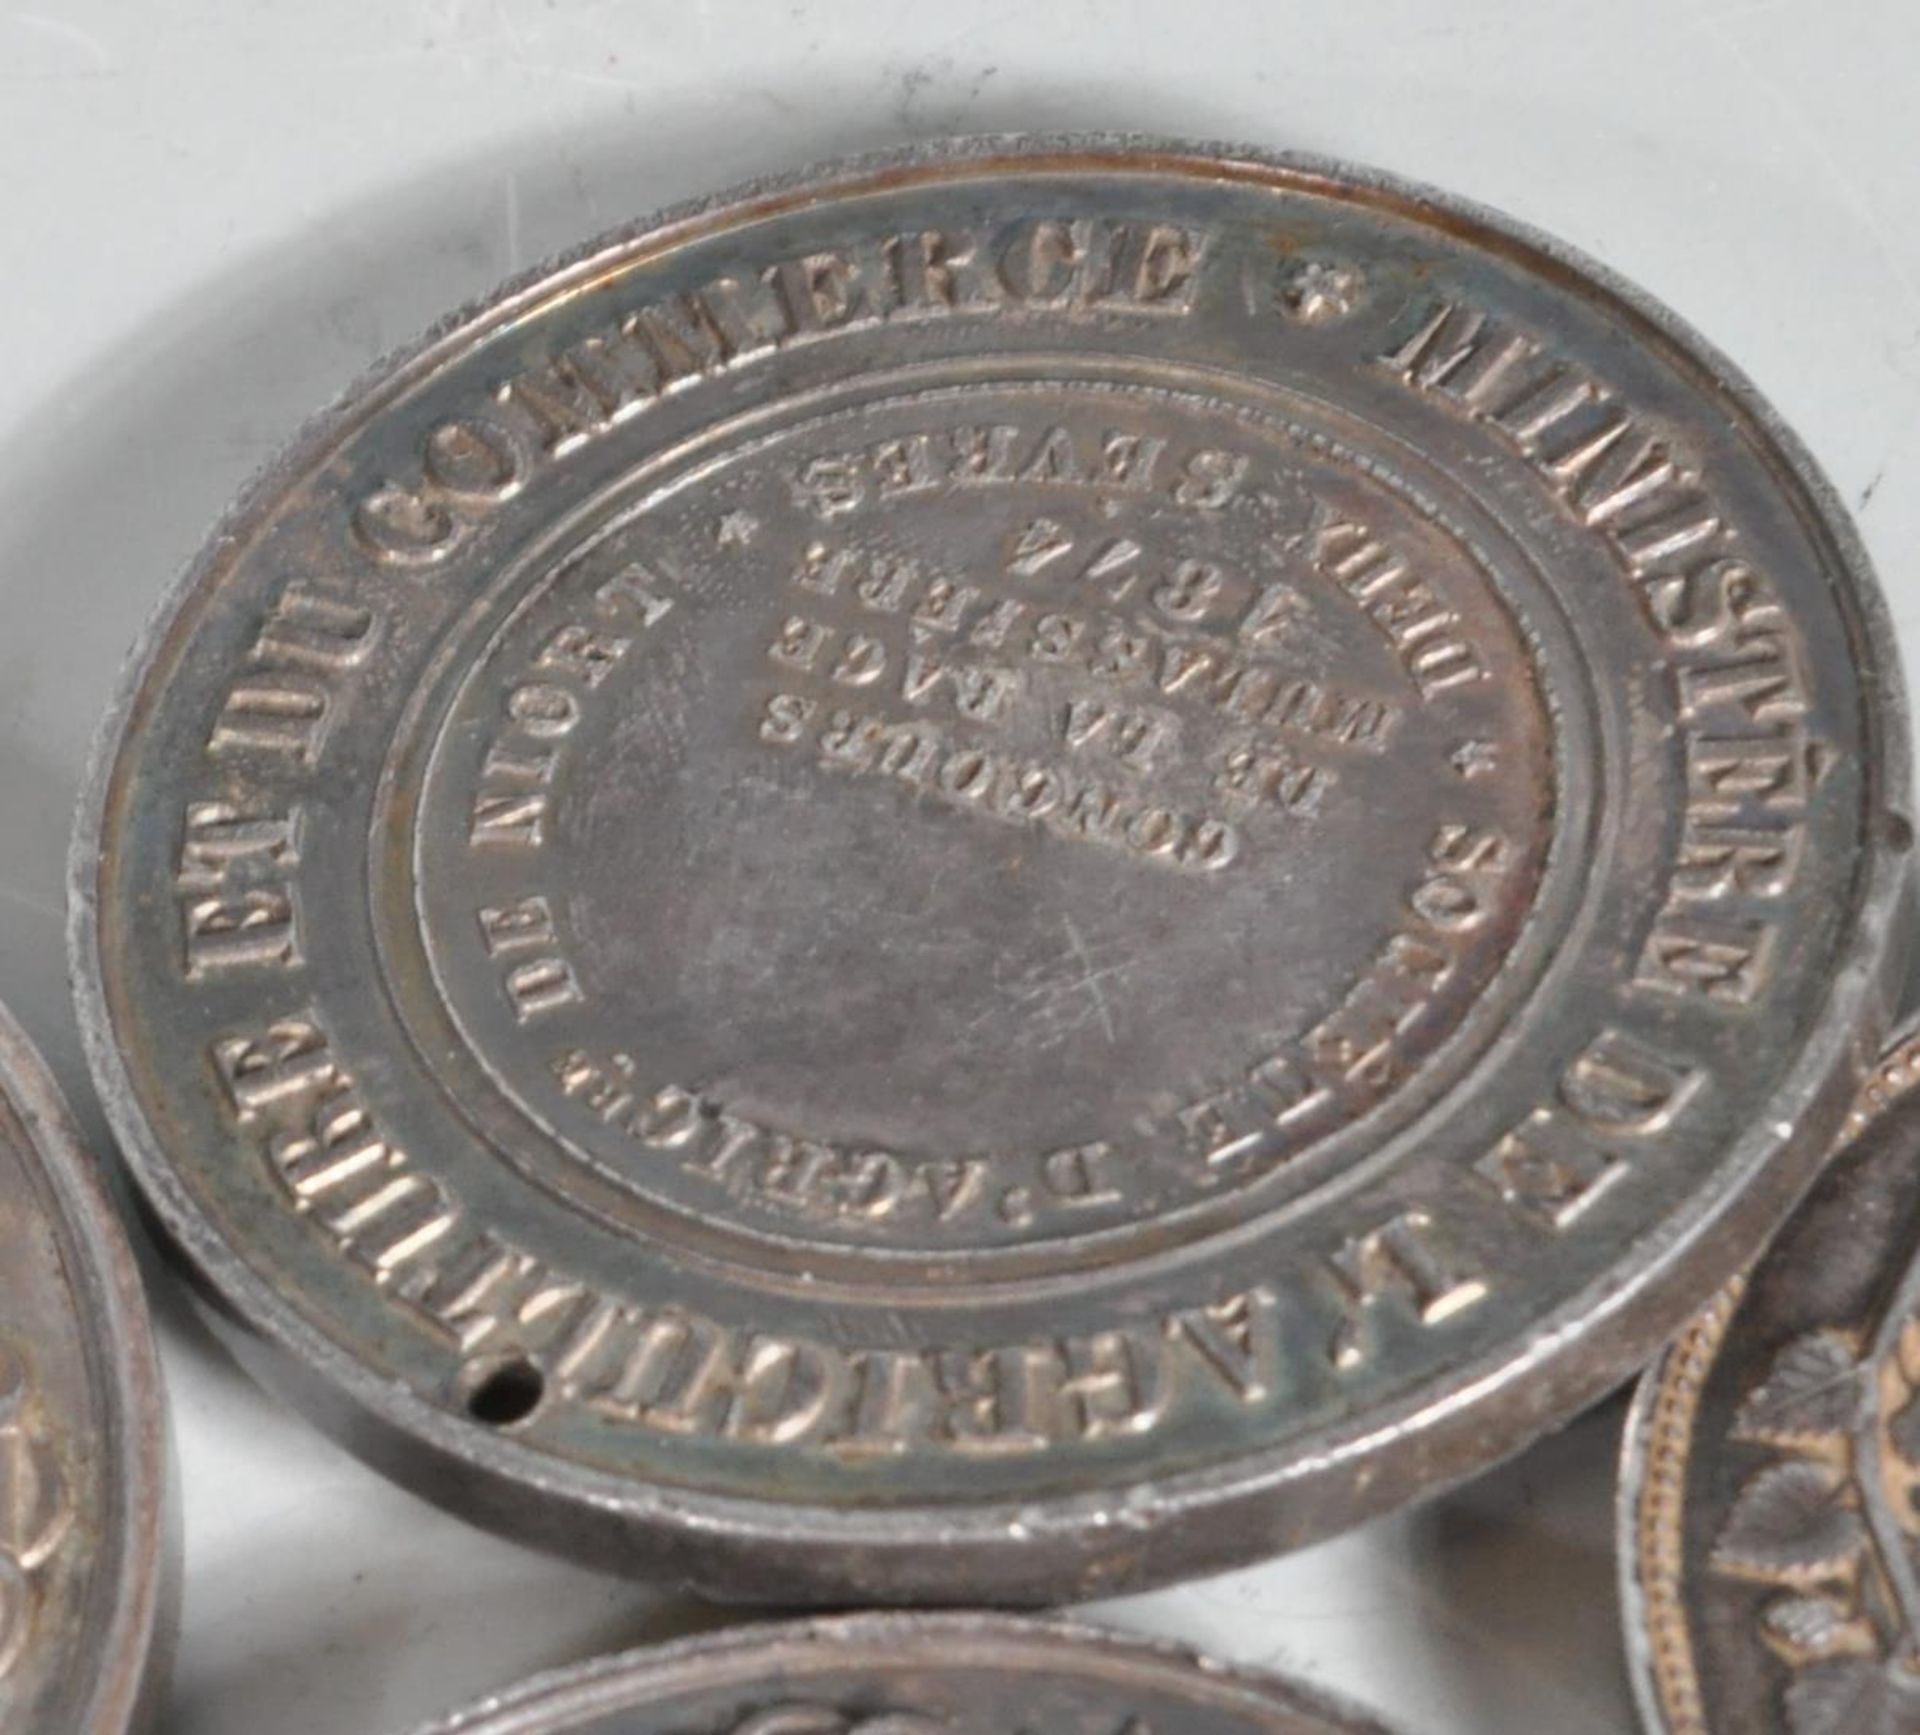 SIX 19TH CENTURY FRENCH AGRICULTURAL SILVER MEDALS - Image 5 of 6